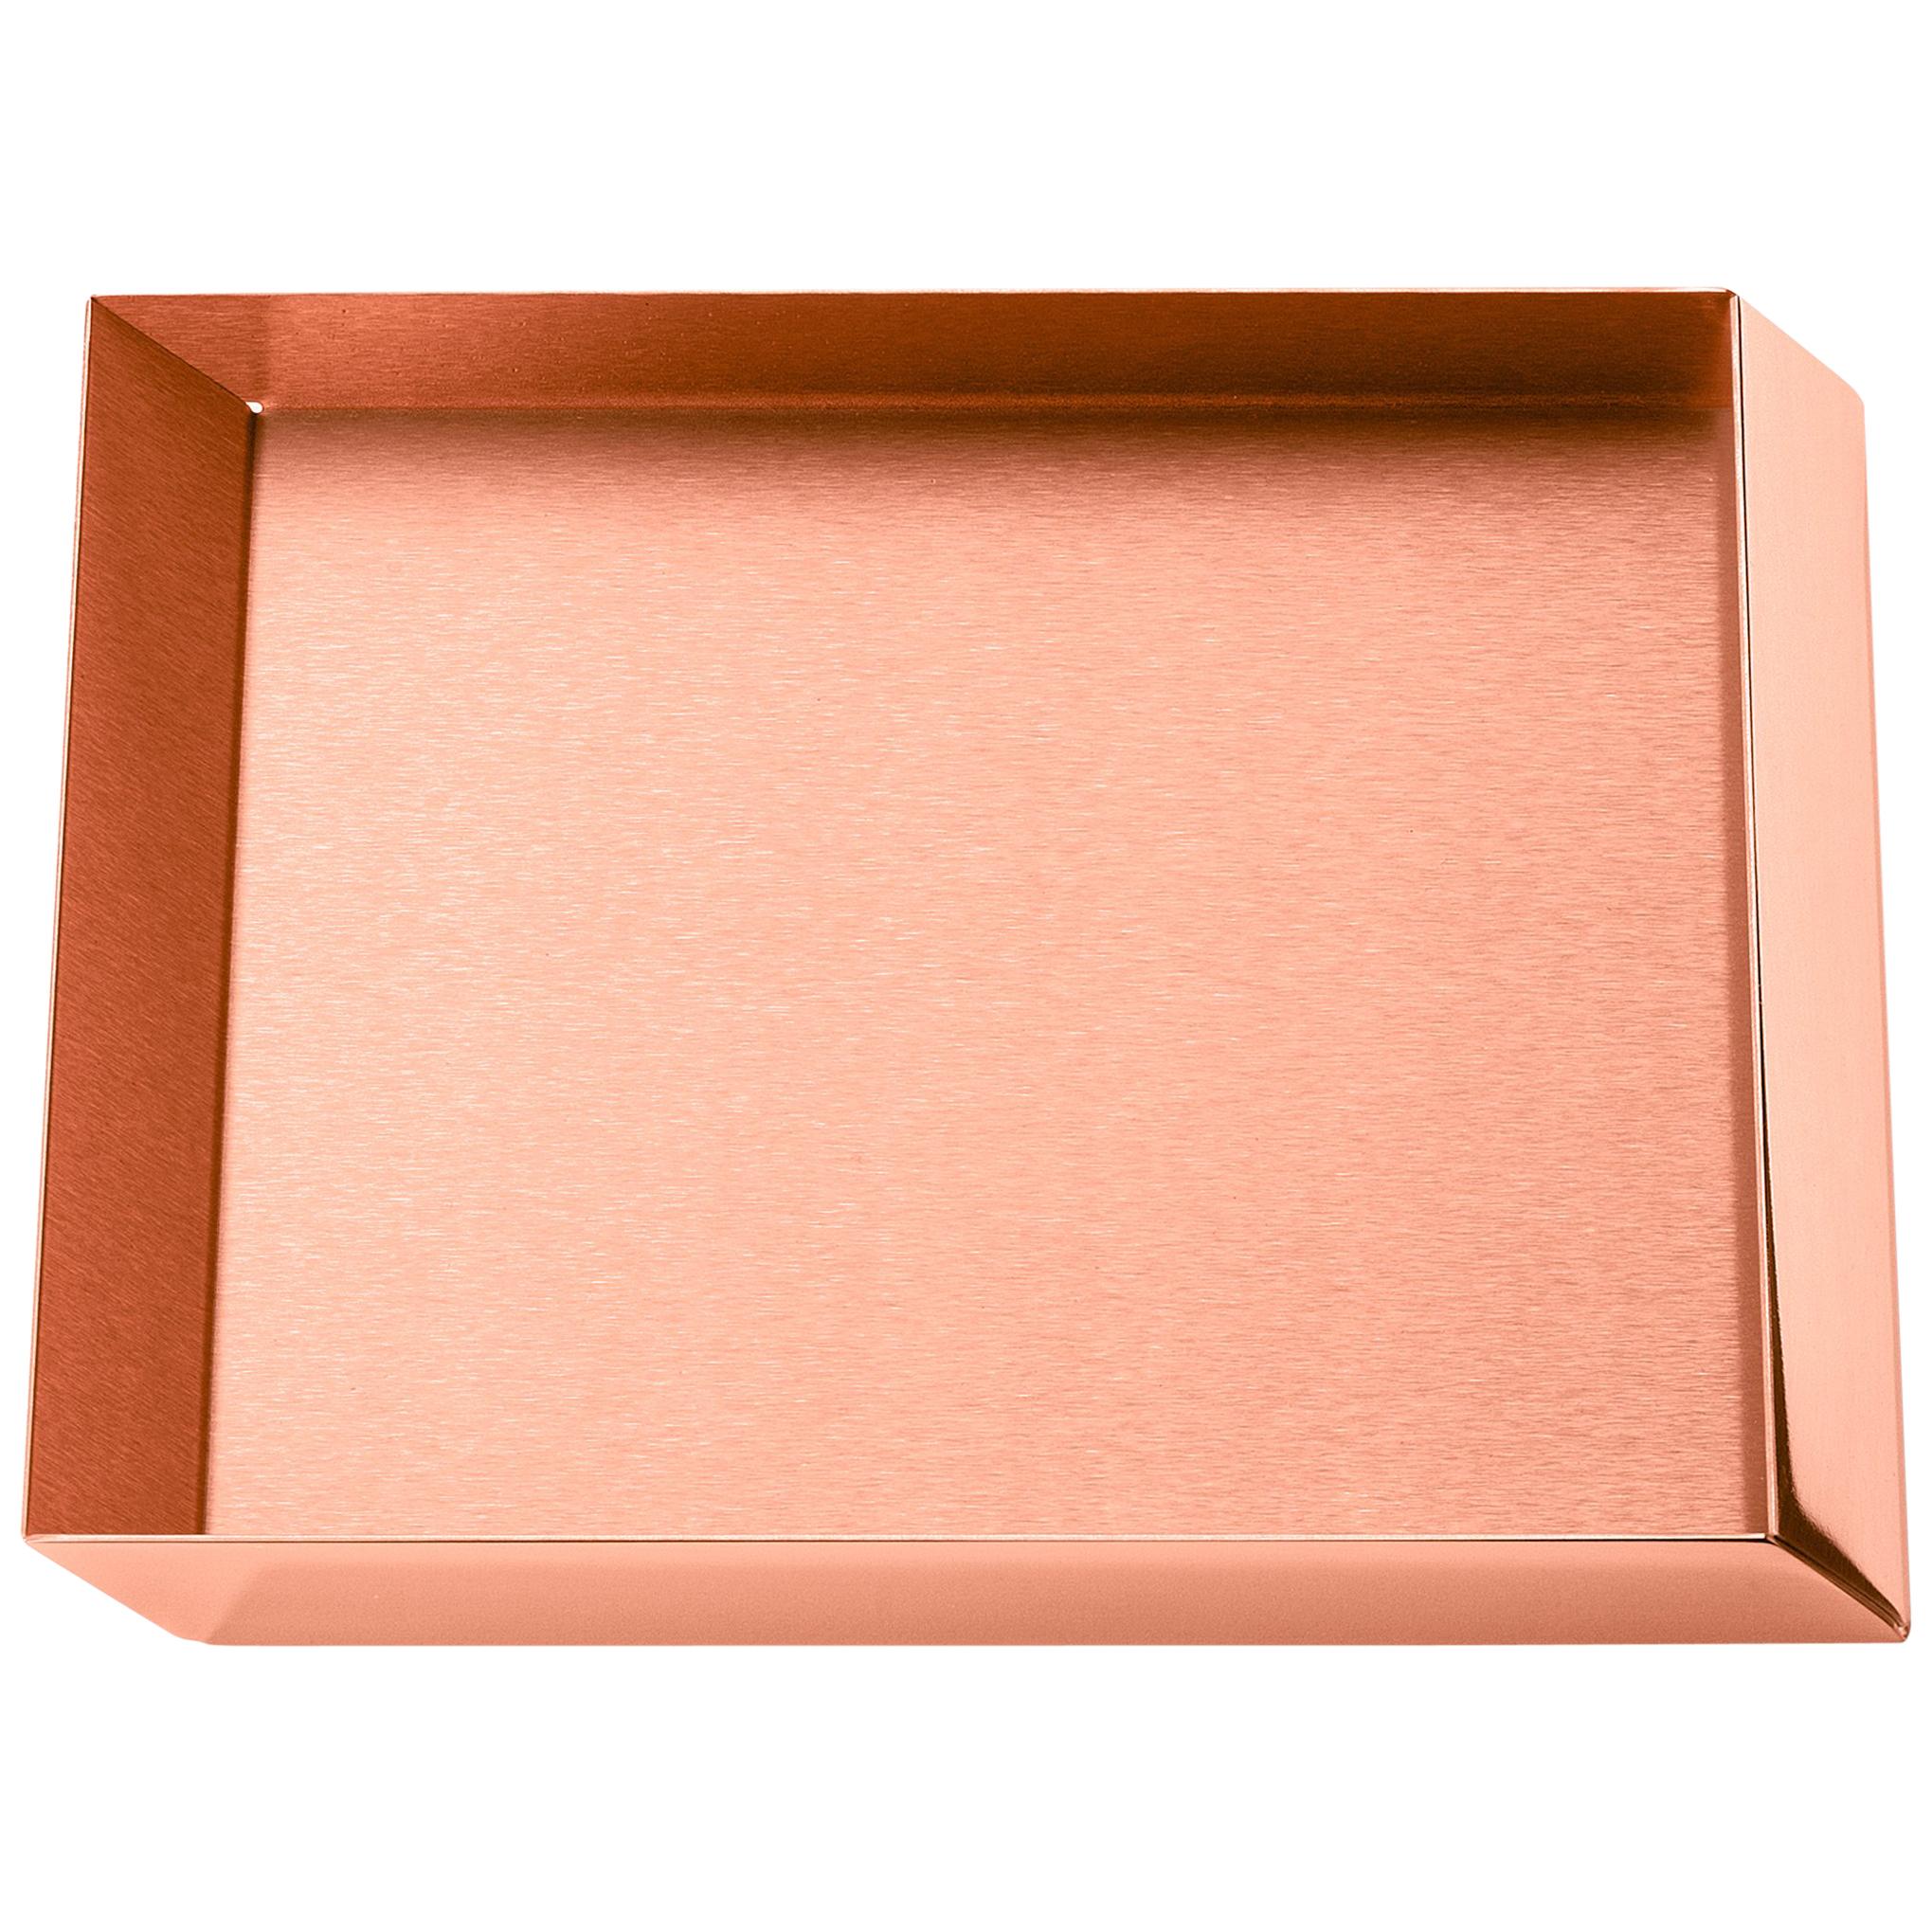 Ghidini 1961 Axonometry Small Squared Tray in Copper by Elisa Giovanni For Sale